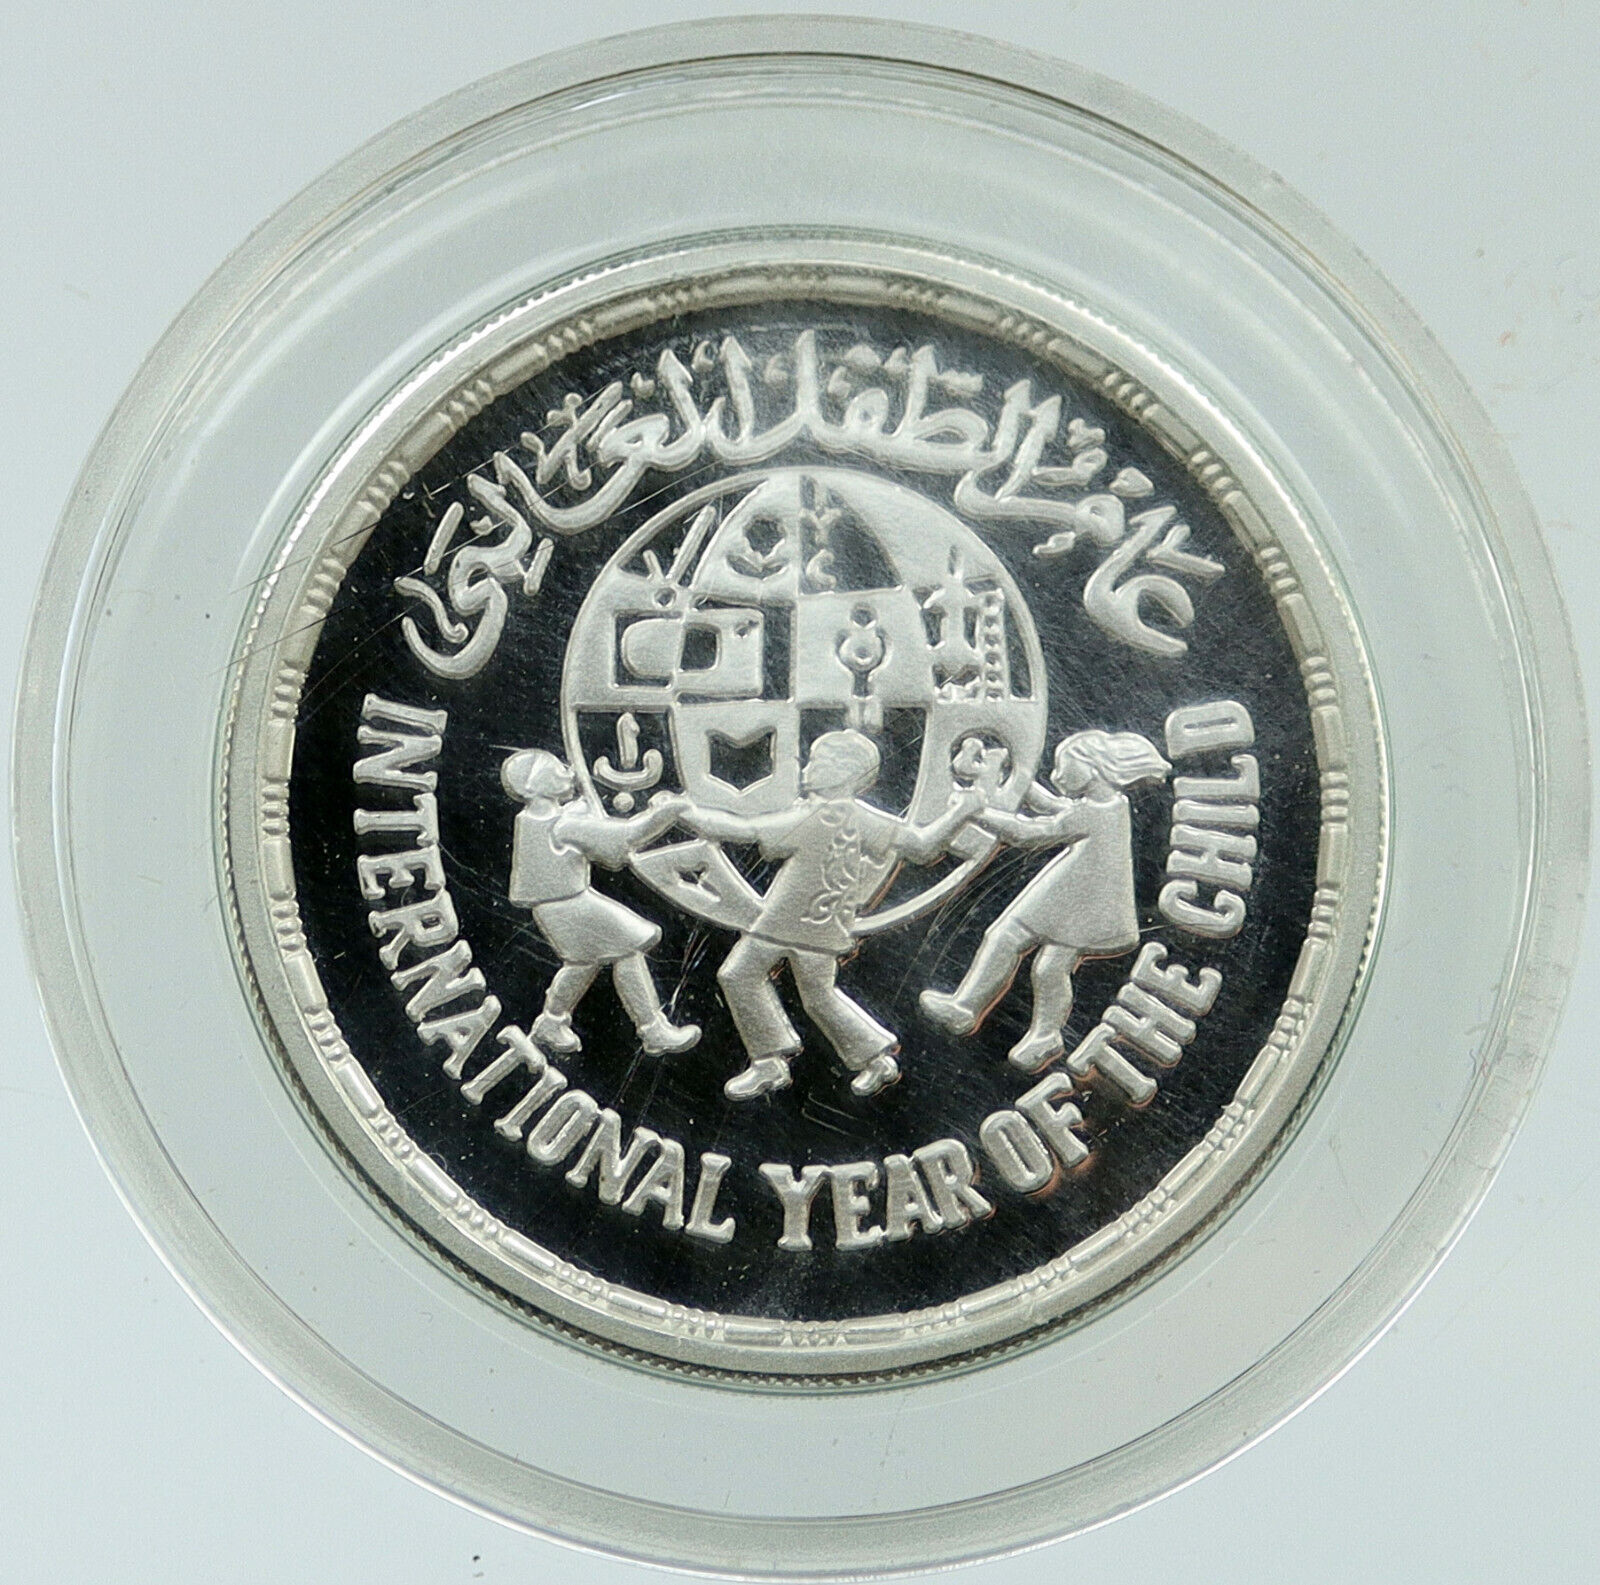 1981 EGYPT Silver 5 Pounds Coin YEAR OF THE CHILD CHILDREN Egyptian i116973